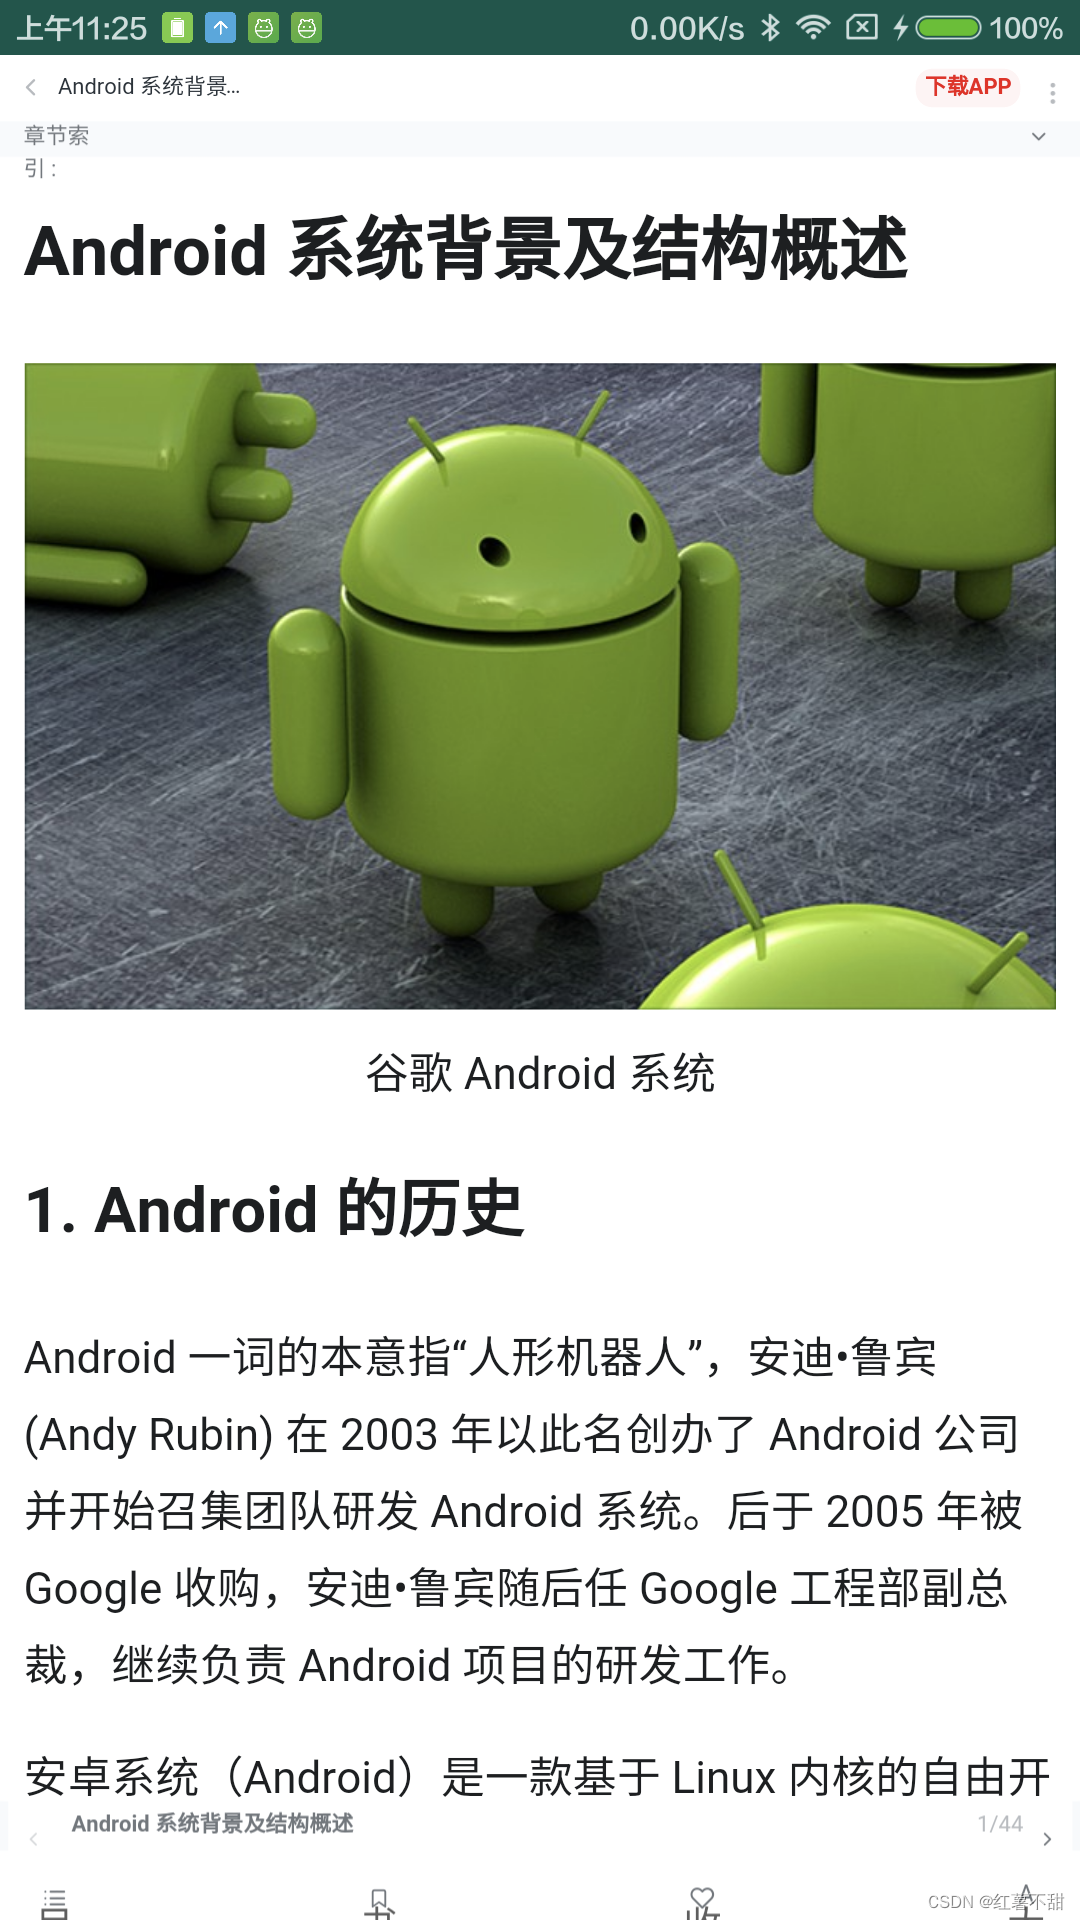 52. 【Android教程】网页视图：WebView